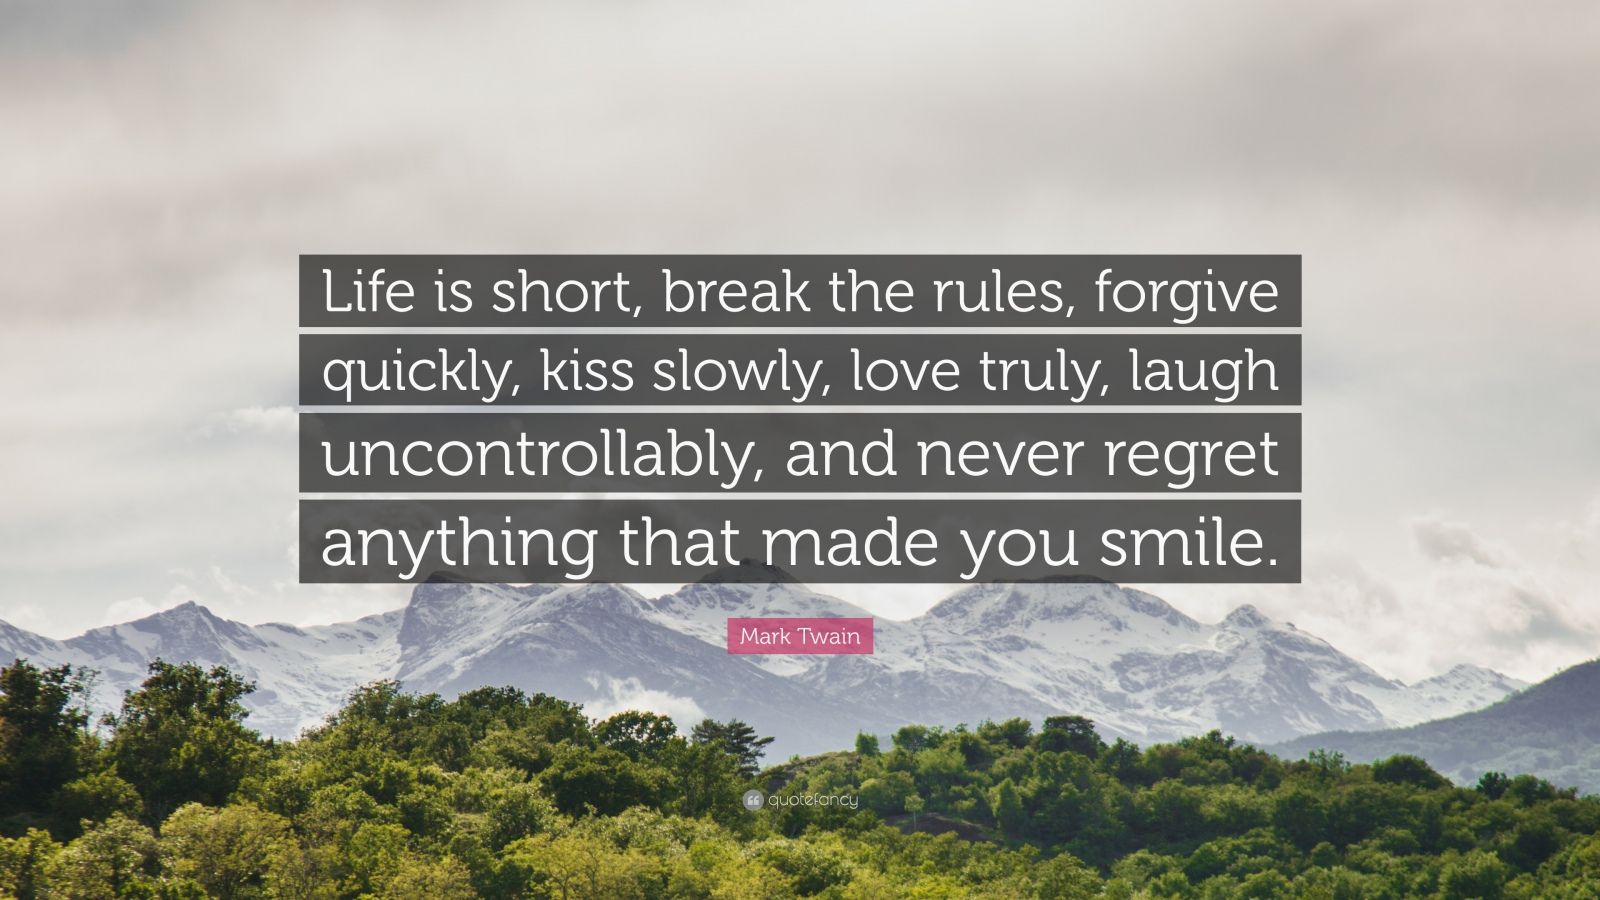 mark twain quote life is short break the rules forgive quickly - Mark Twain Quotes